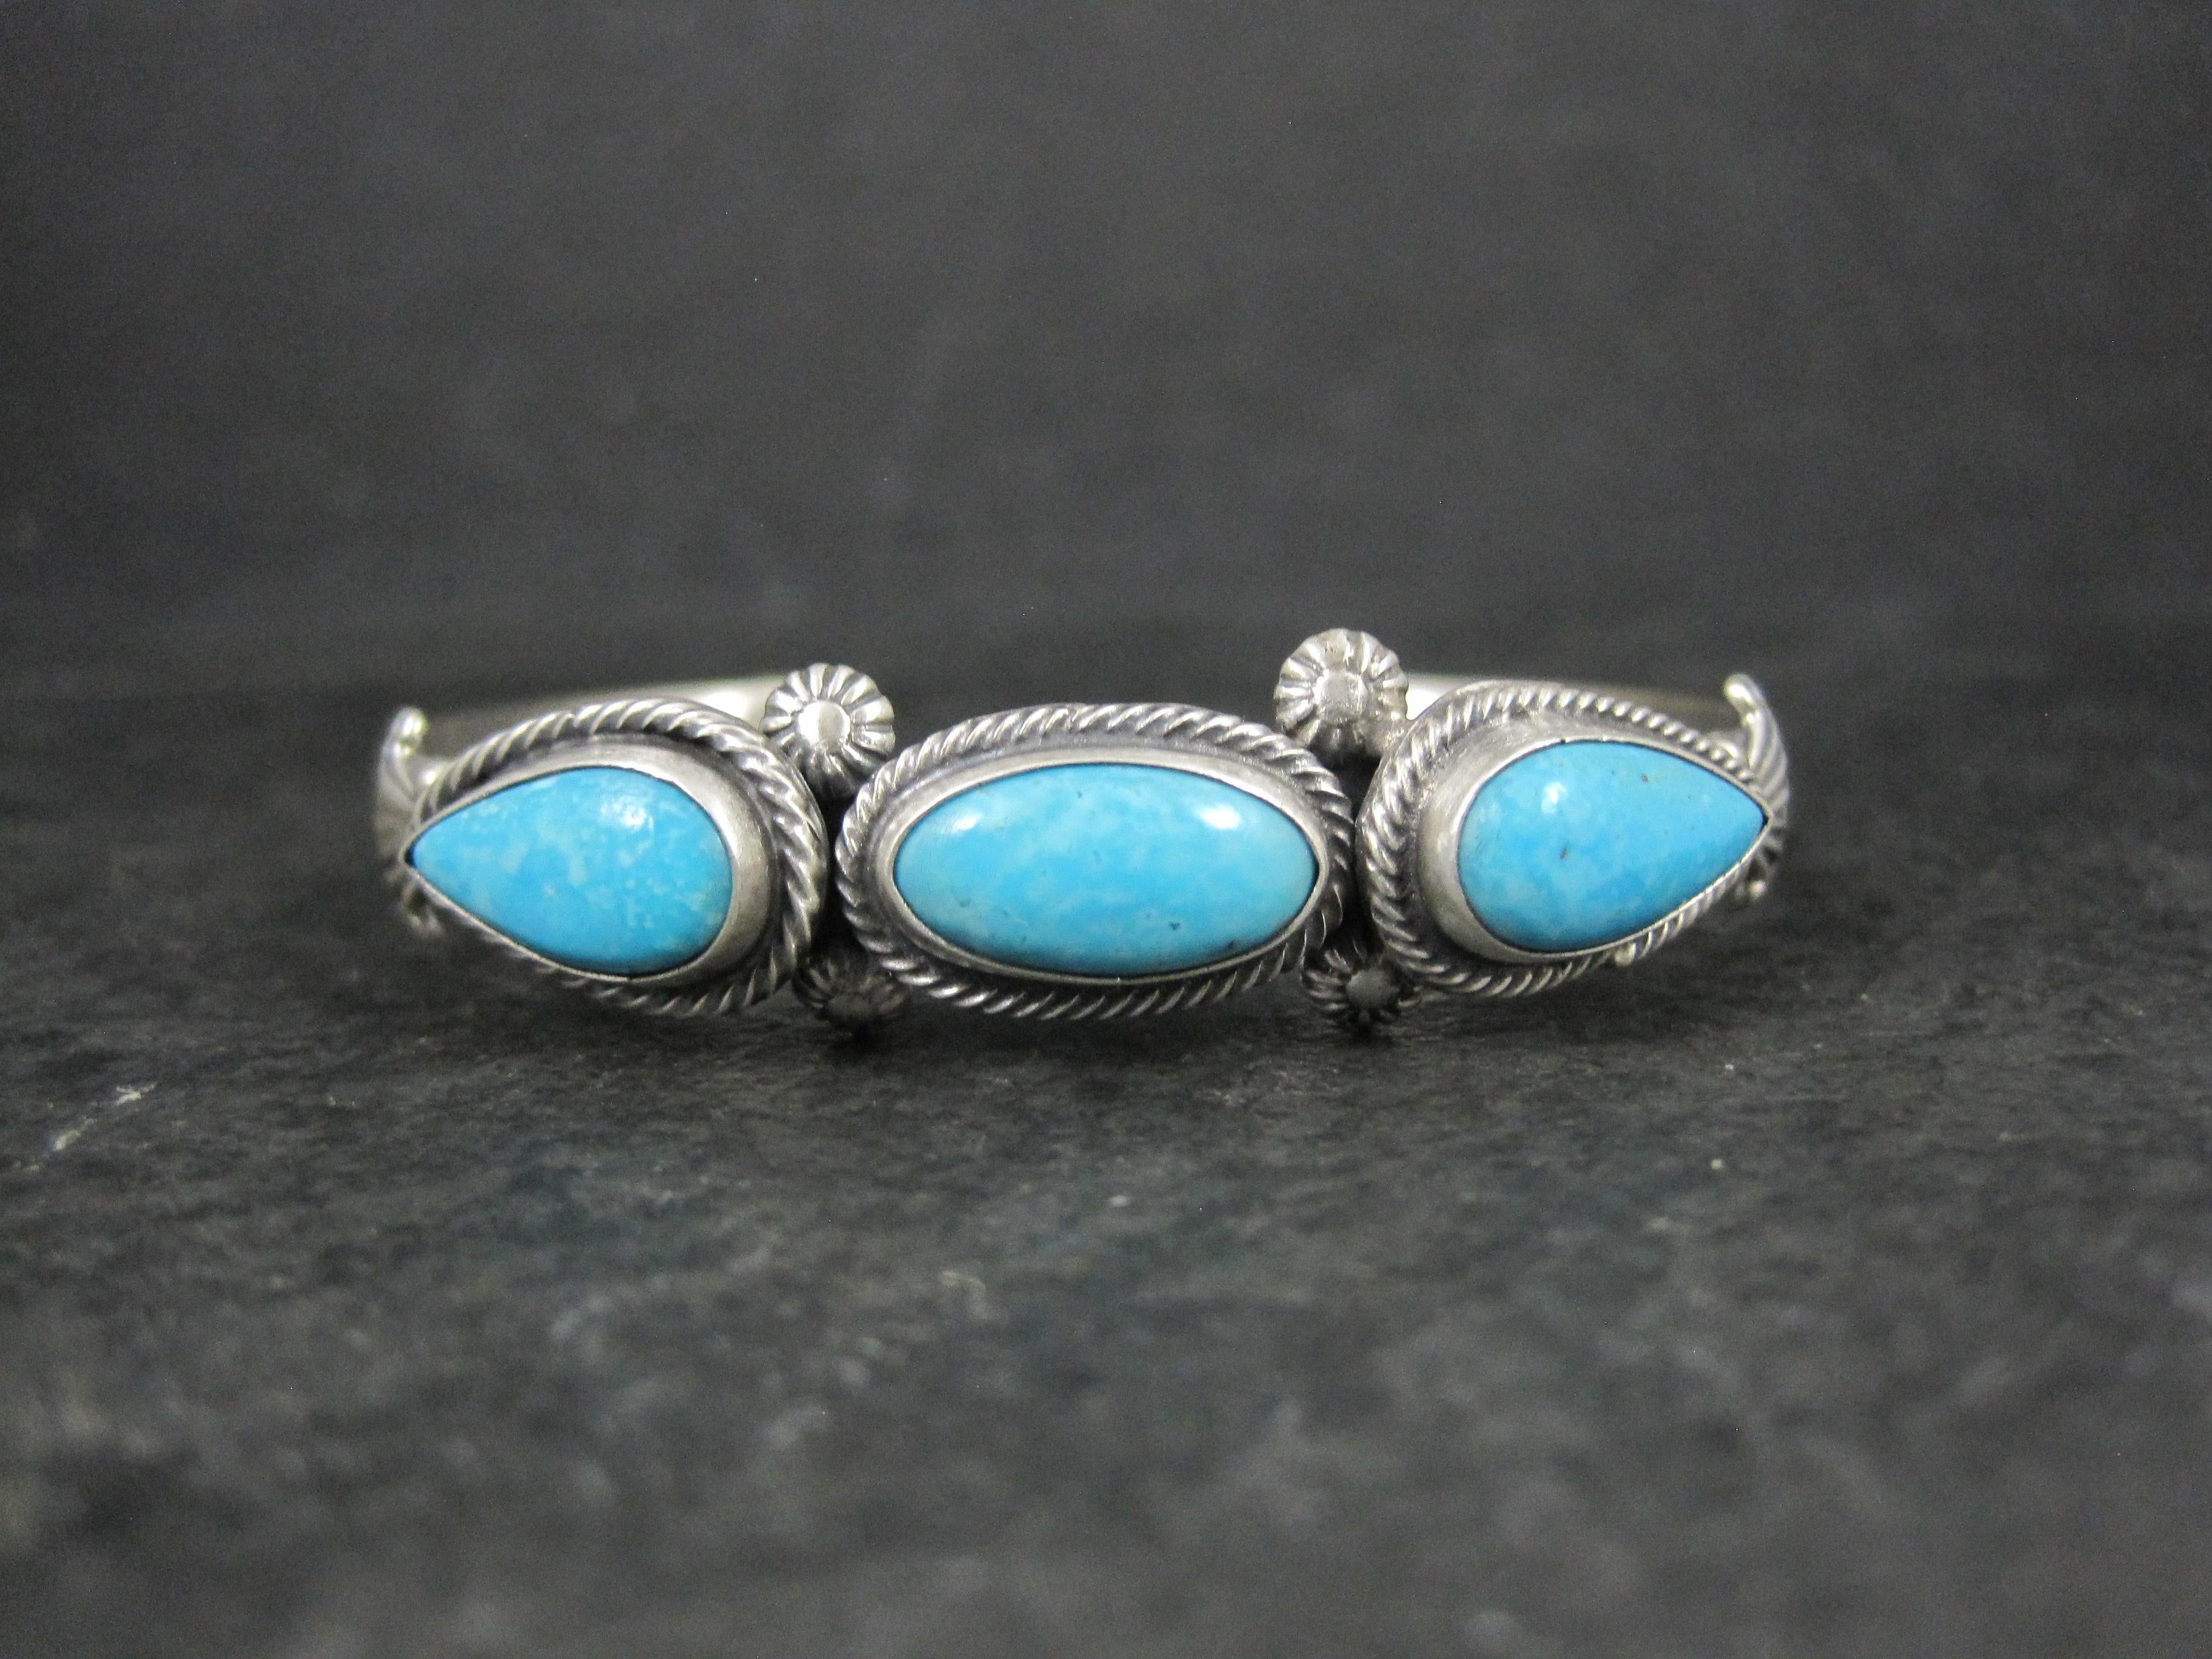 This beautiful cuff bracelet is sterling silver with 3 genuine turquoise gemstones.

The face of this cuff bracelet measures 1/2 of an inch wide.
It has an inner circumference of 6 inches including the 1 inch gap.
Weight: 20.7 grams

Made by Navajo